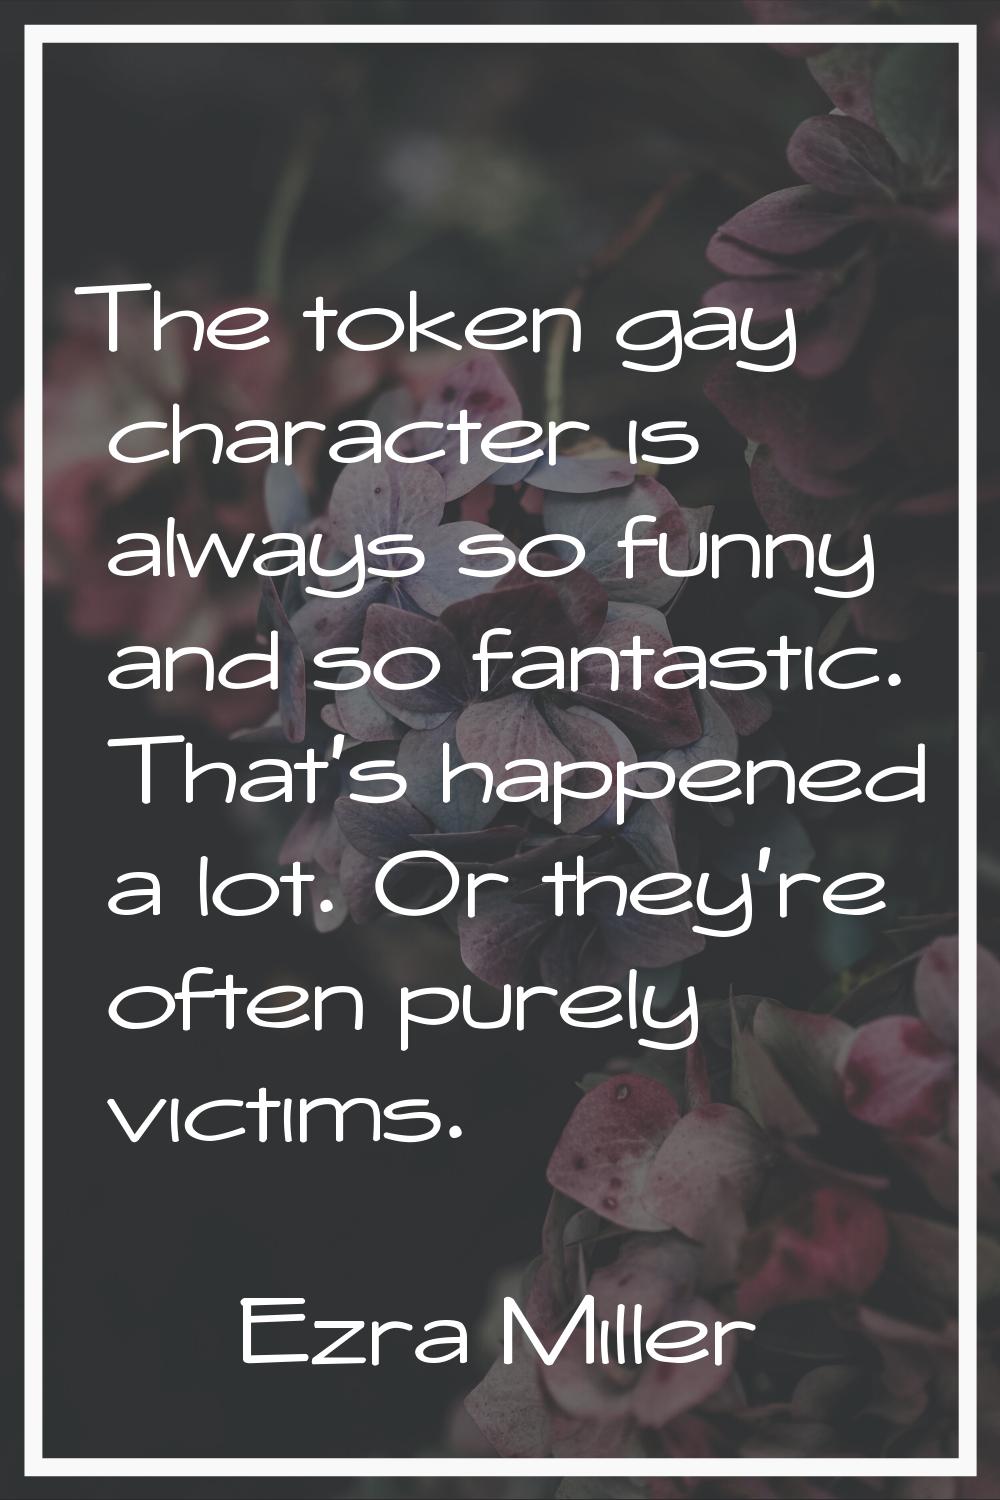 The token gay character is always so funny and so fantastic. That's happened a lot. Or they're ofte